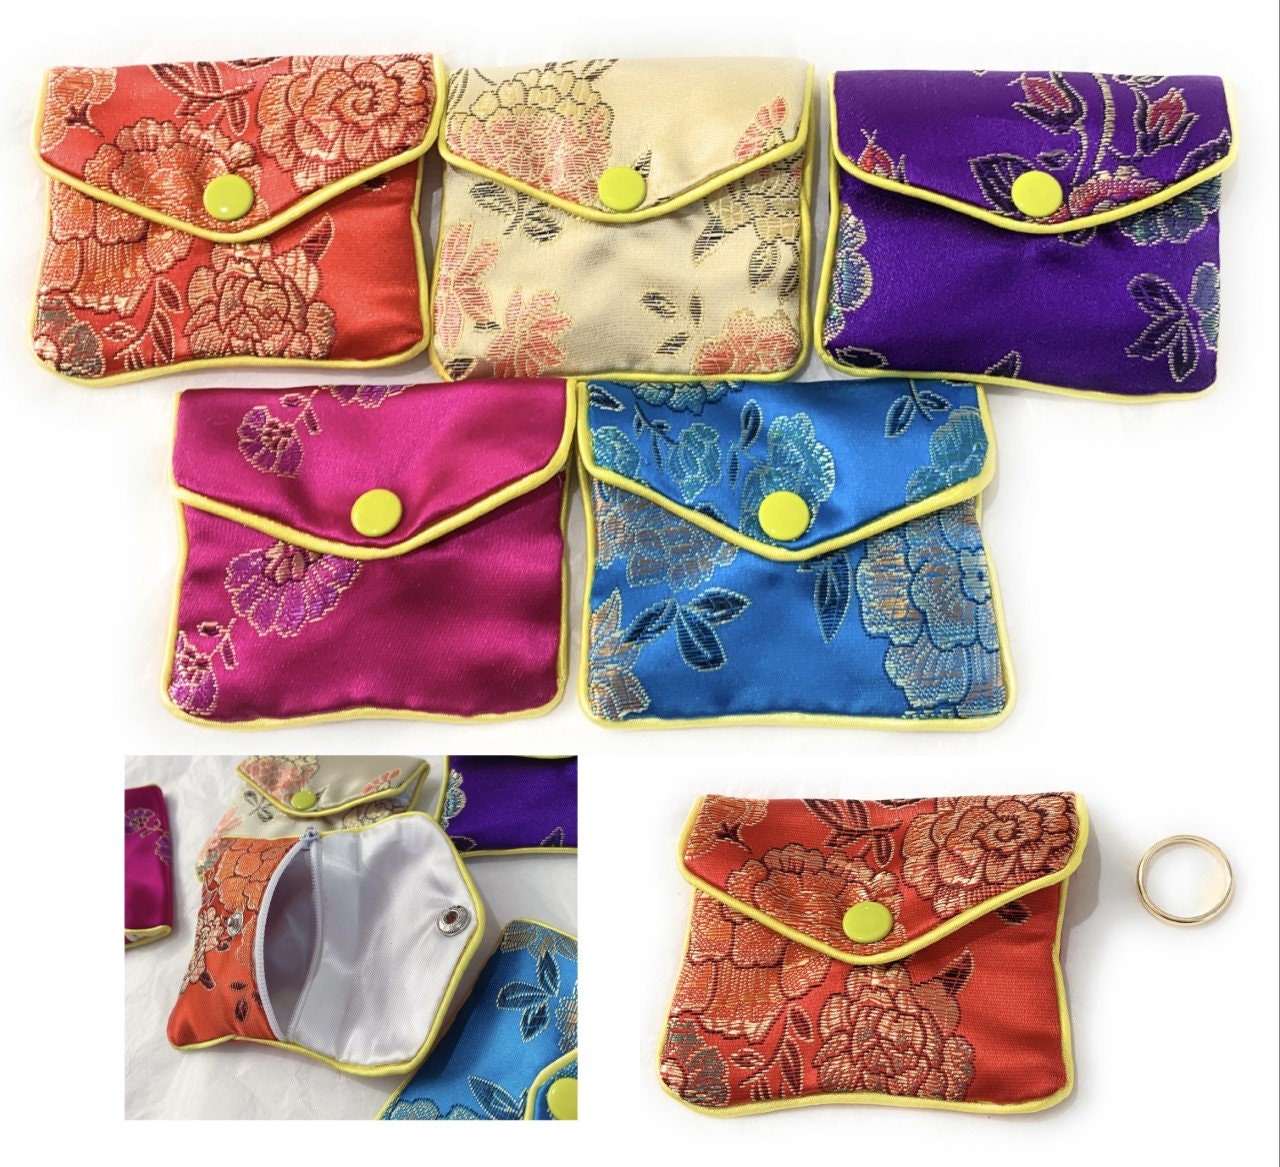 Floral Zipper Silk In Change Purse Pouch Set Small Gift Bags For Jewelry,  Chinese Credit Card Holder Silk Bag In 6x8, 8x10, And 10x12 Cm Sizes  Whol317K From Ibezo, $61.51